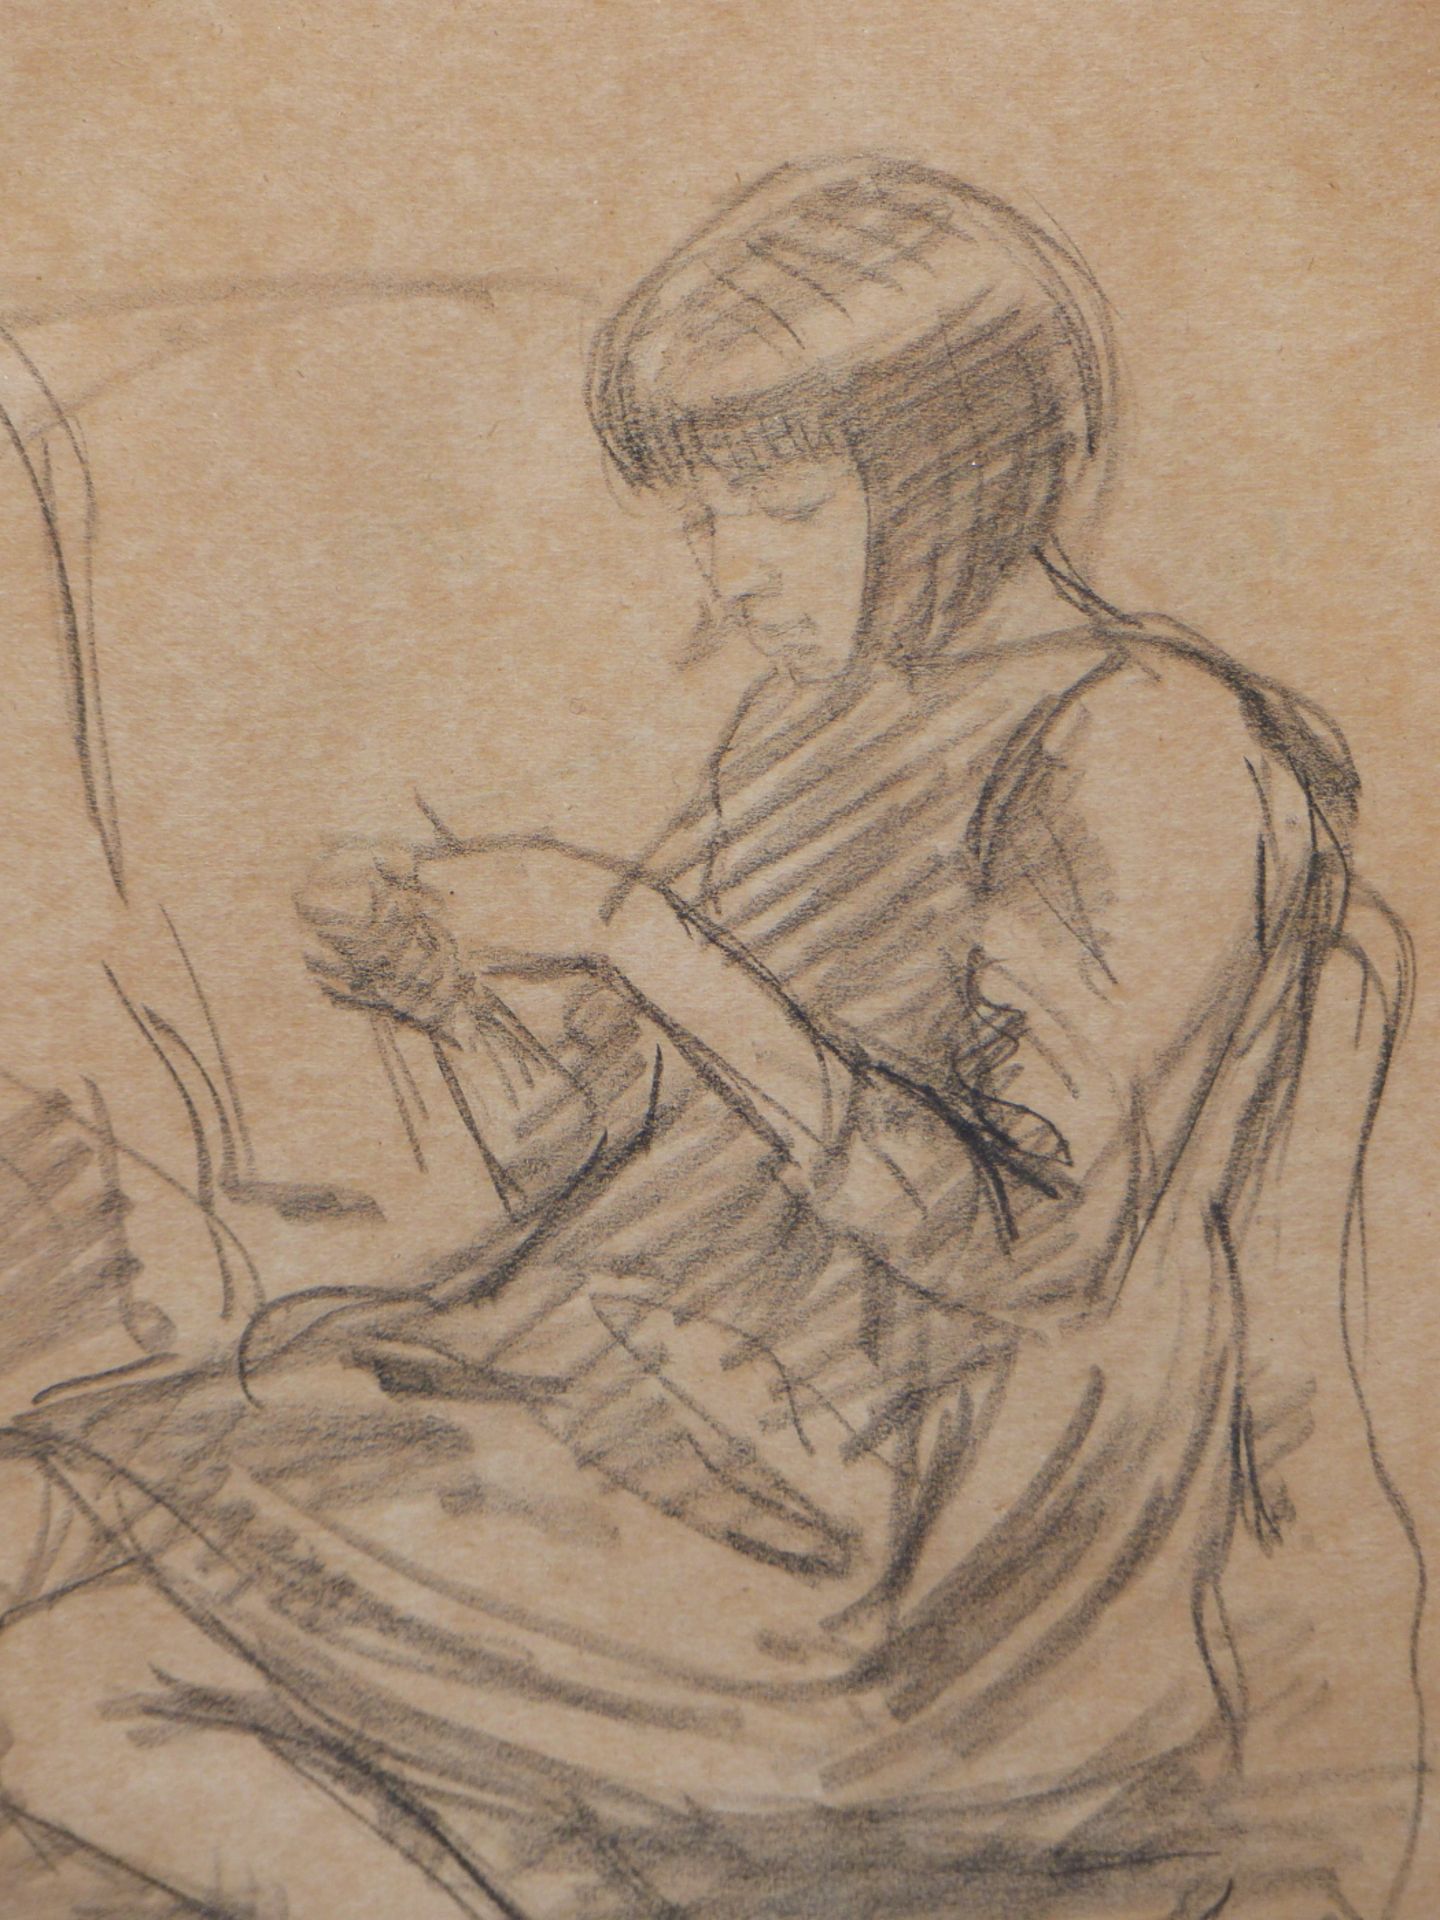 ENAID JONES. (1888-1978) ARR. " JULIA " A YOUNG GIRL KNITTING , SEATED IN FIRESIDE ARMCHAIR. BLACK